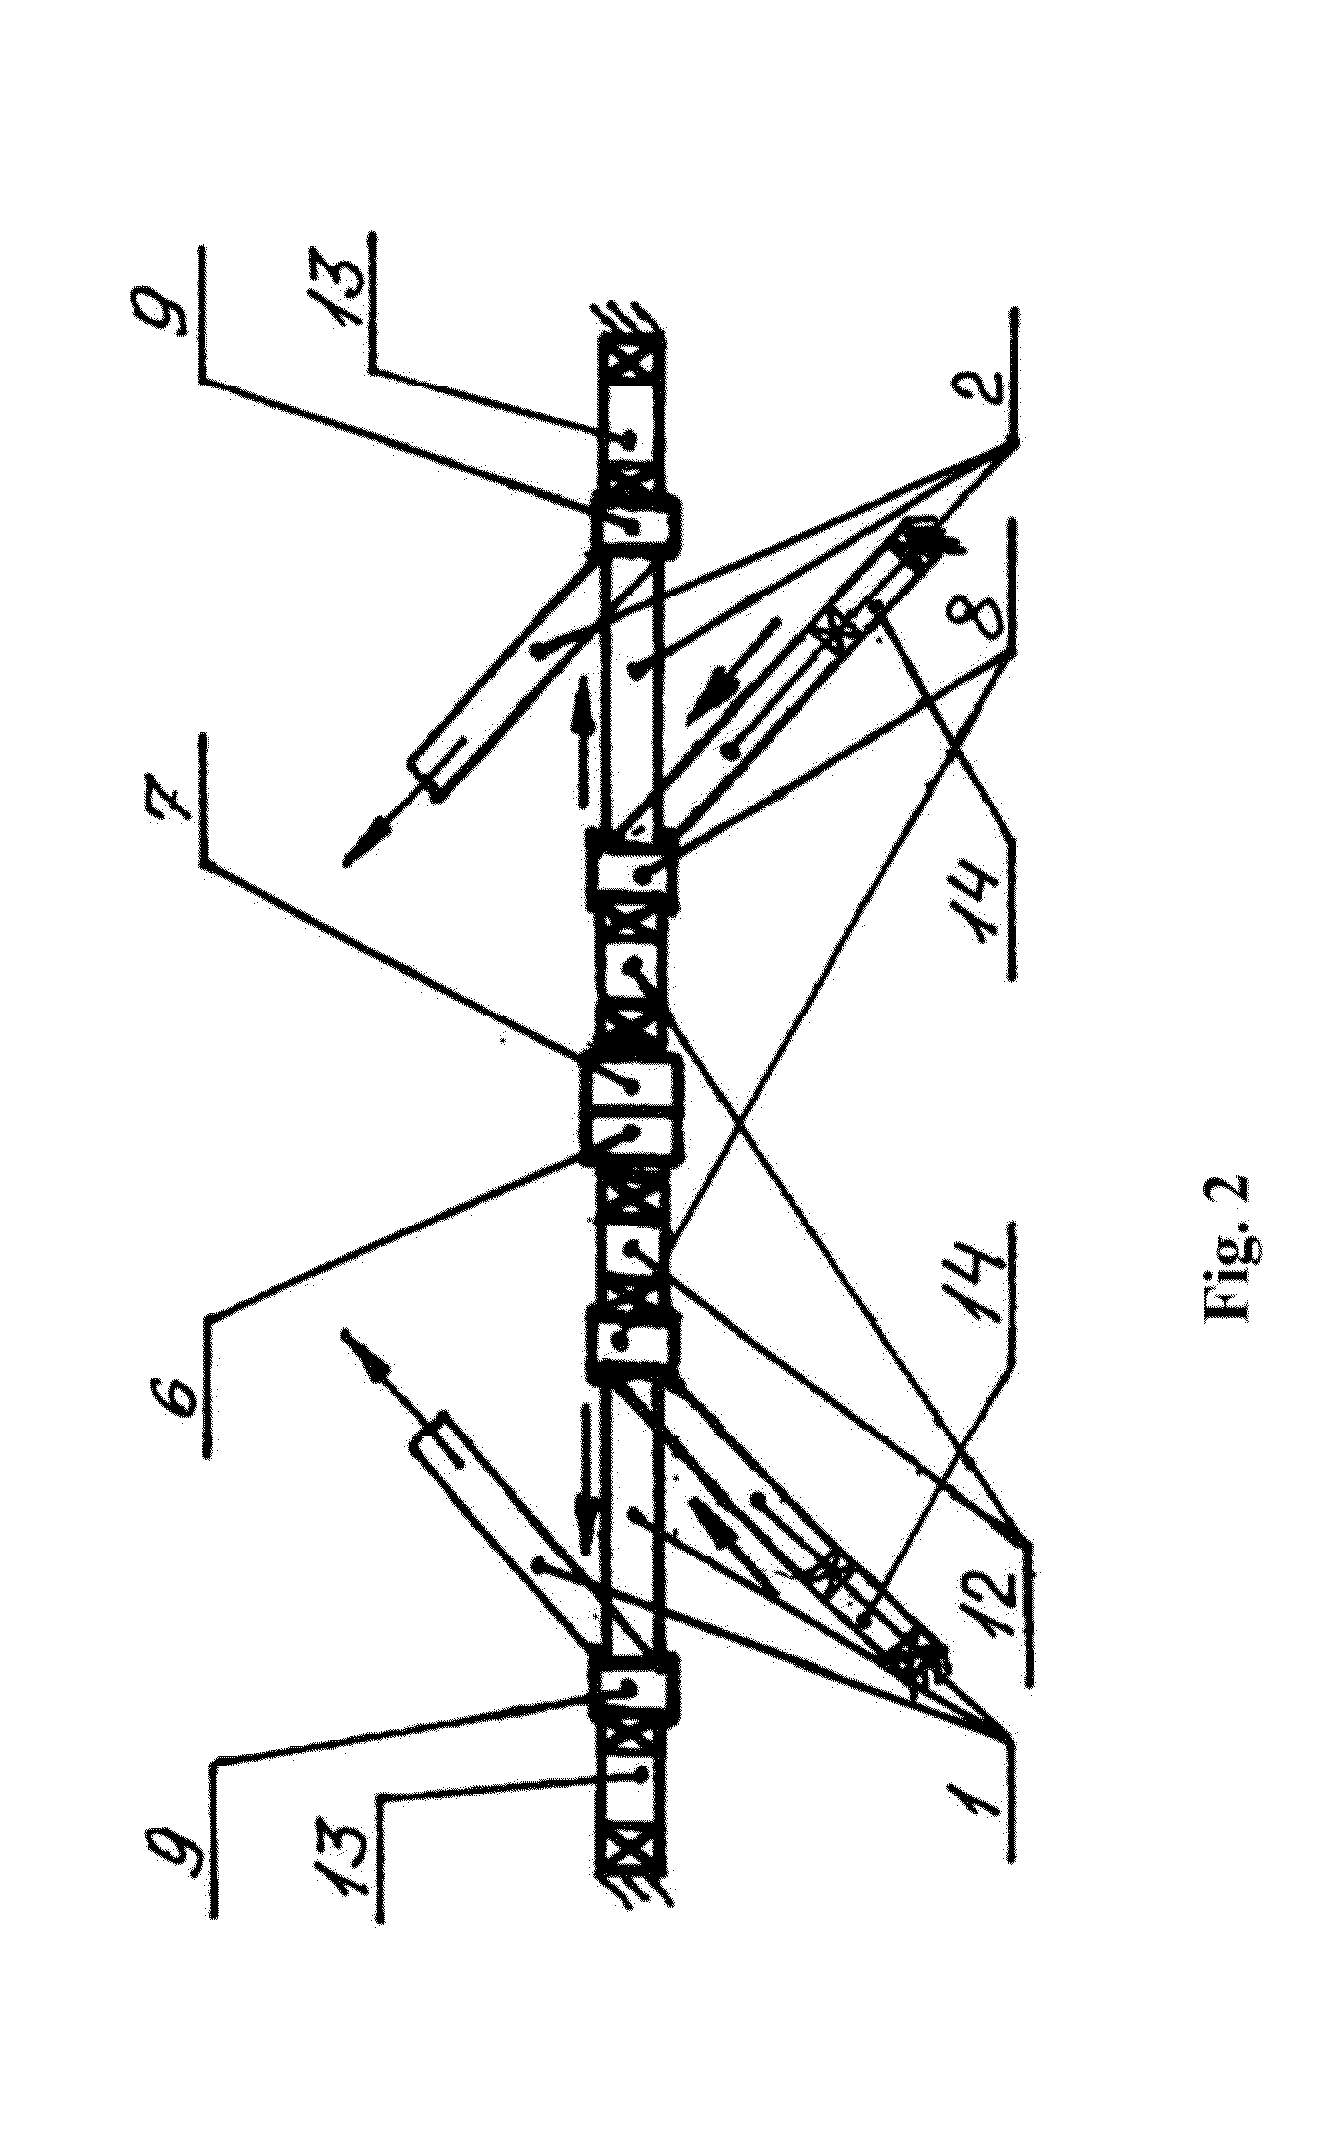 Device for restraining a user in a vehicle seat